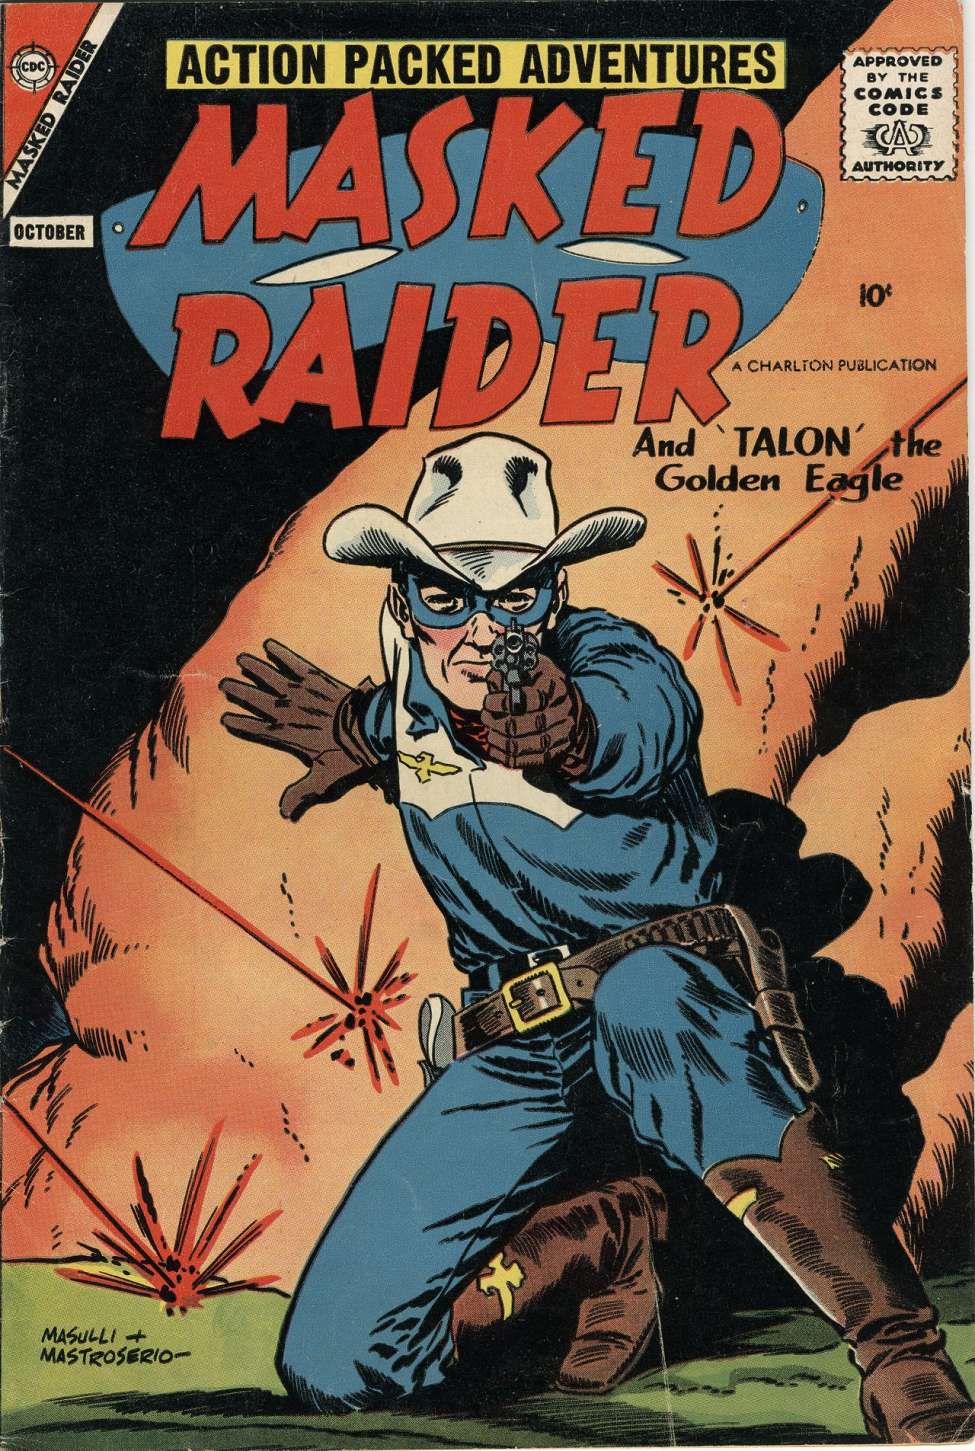 Book Cover For Masked Raider 15